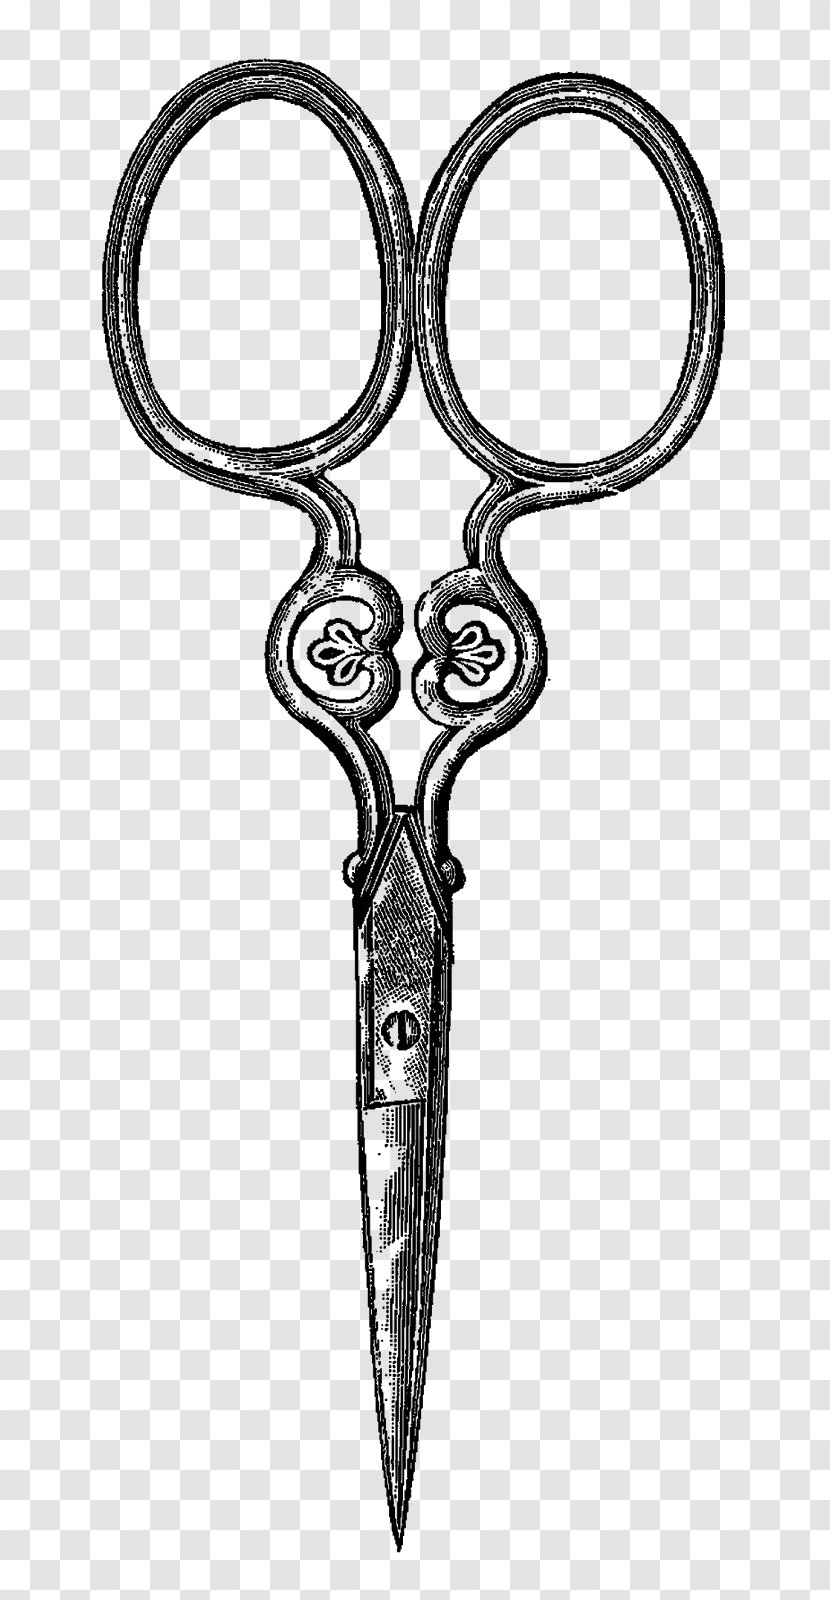 Scissors Drawing Sewing Notions - Digital Image Transparent PNG